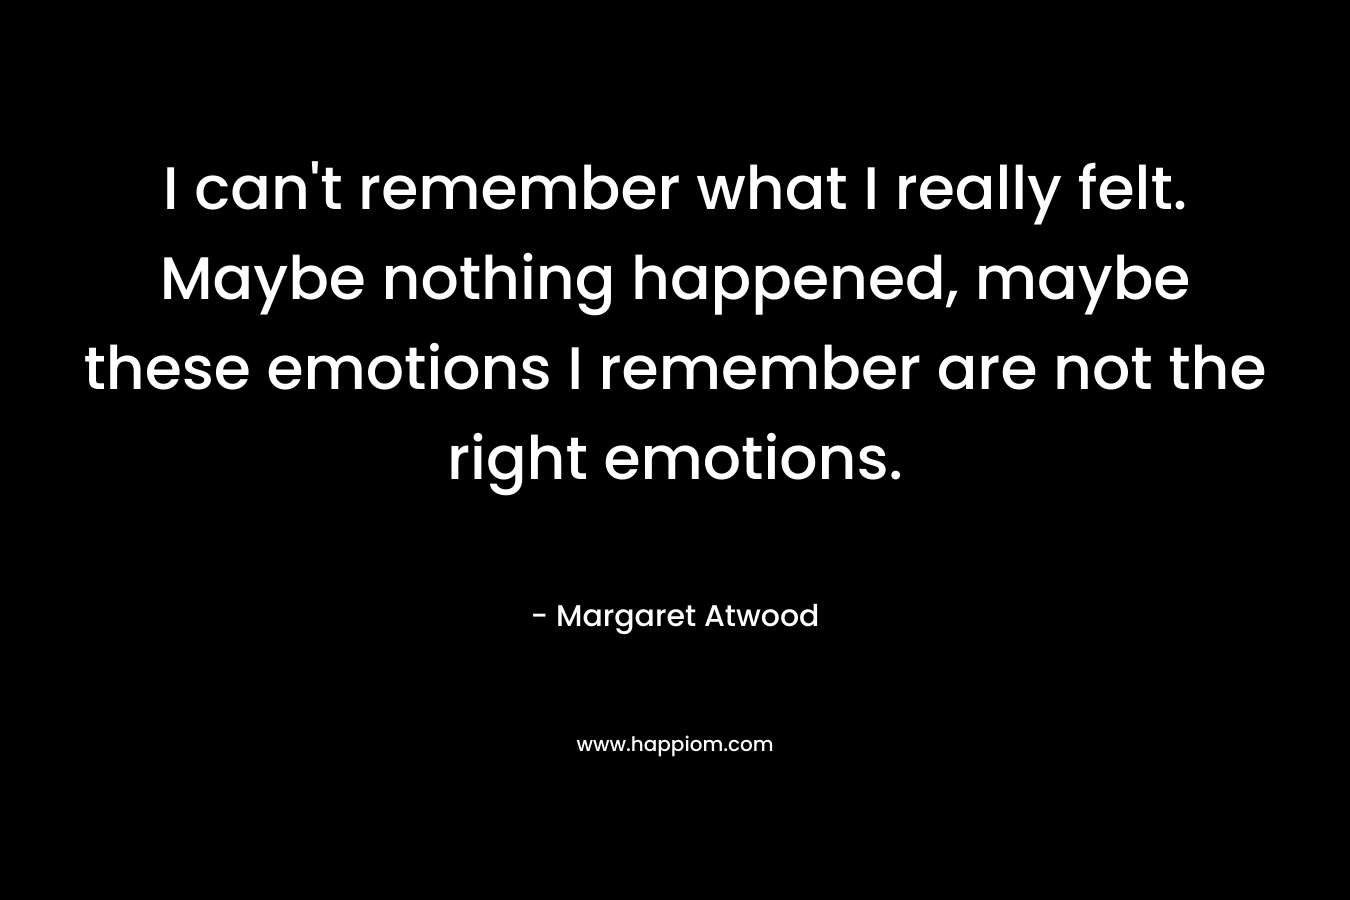 I can't remember what I really felt. Maybe nothing happened, maybe these emotions I remember are not the right emotions.